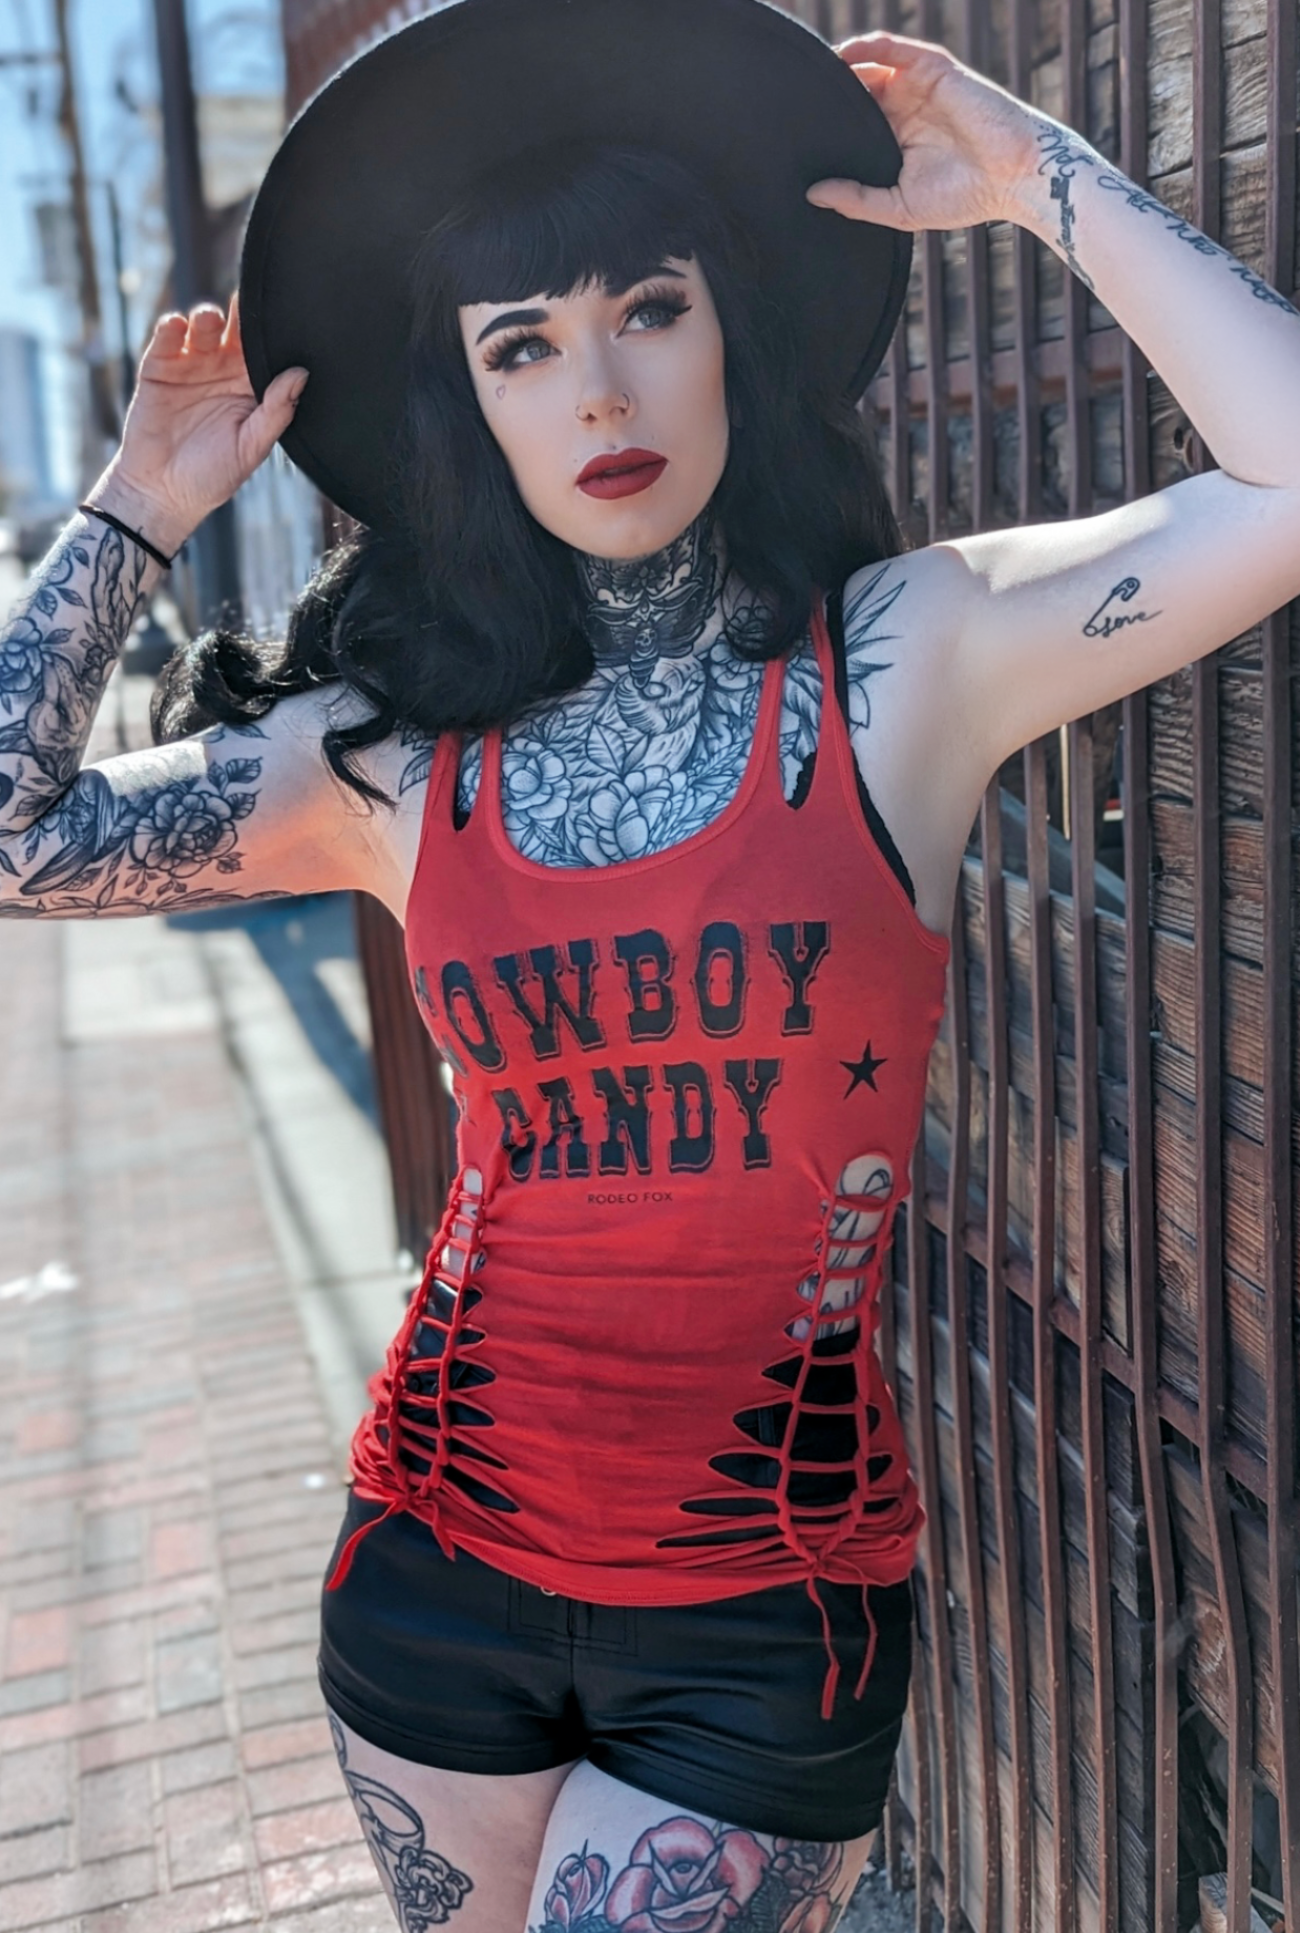 country cowgirl tank top cowboy candy festival style tank top